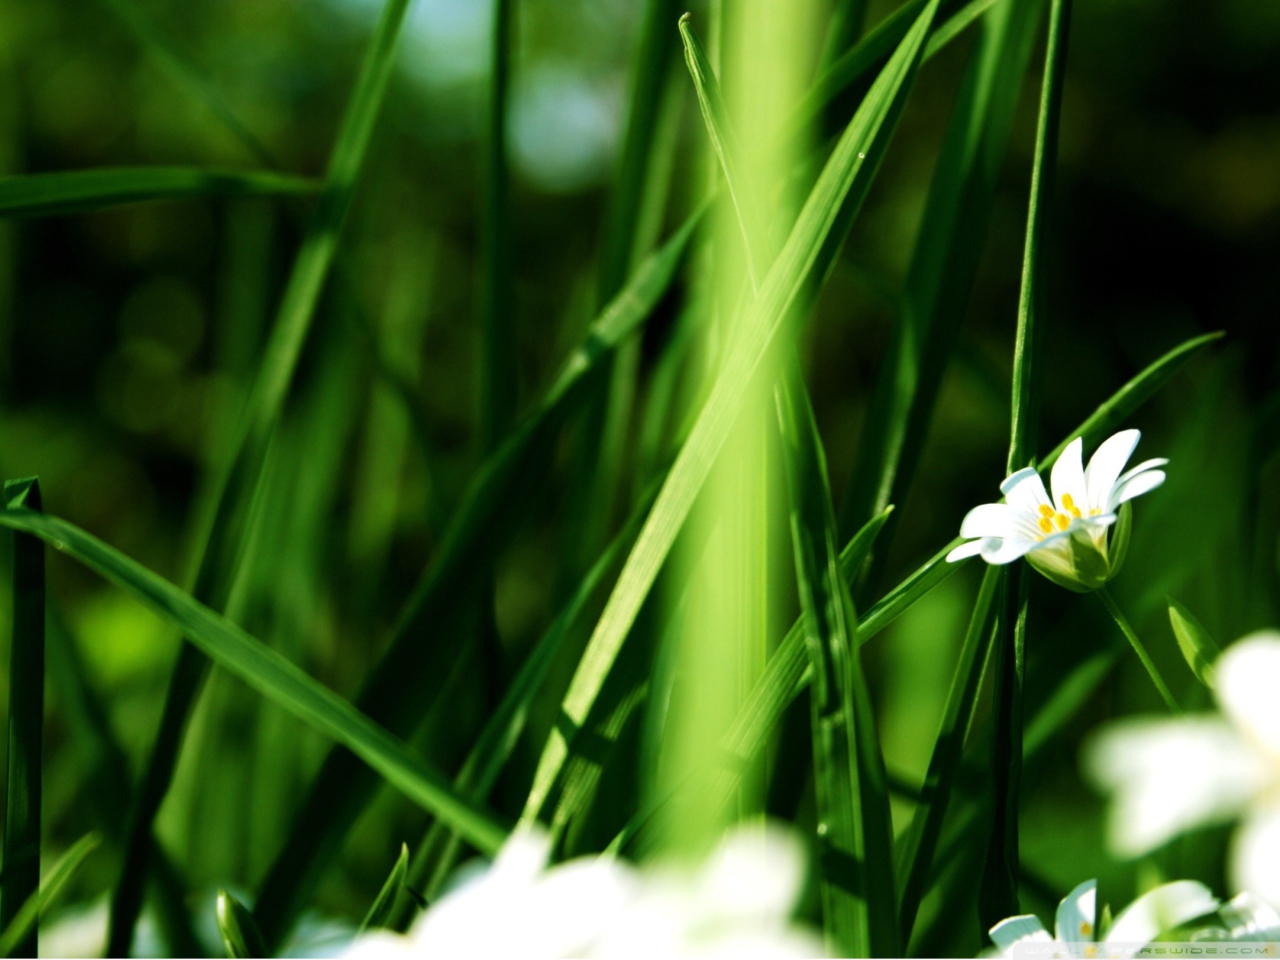 Grass And White Flowers wallpaper 1280x960